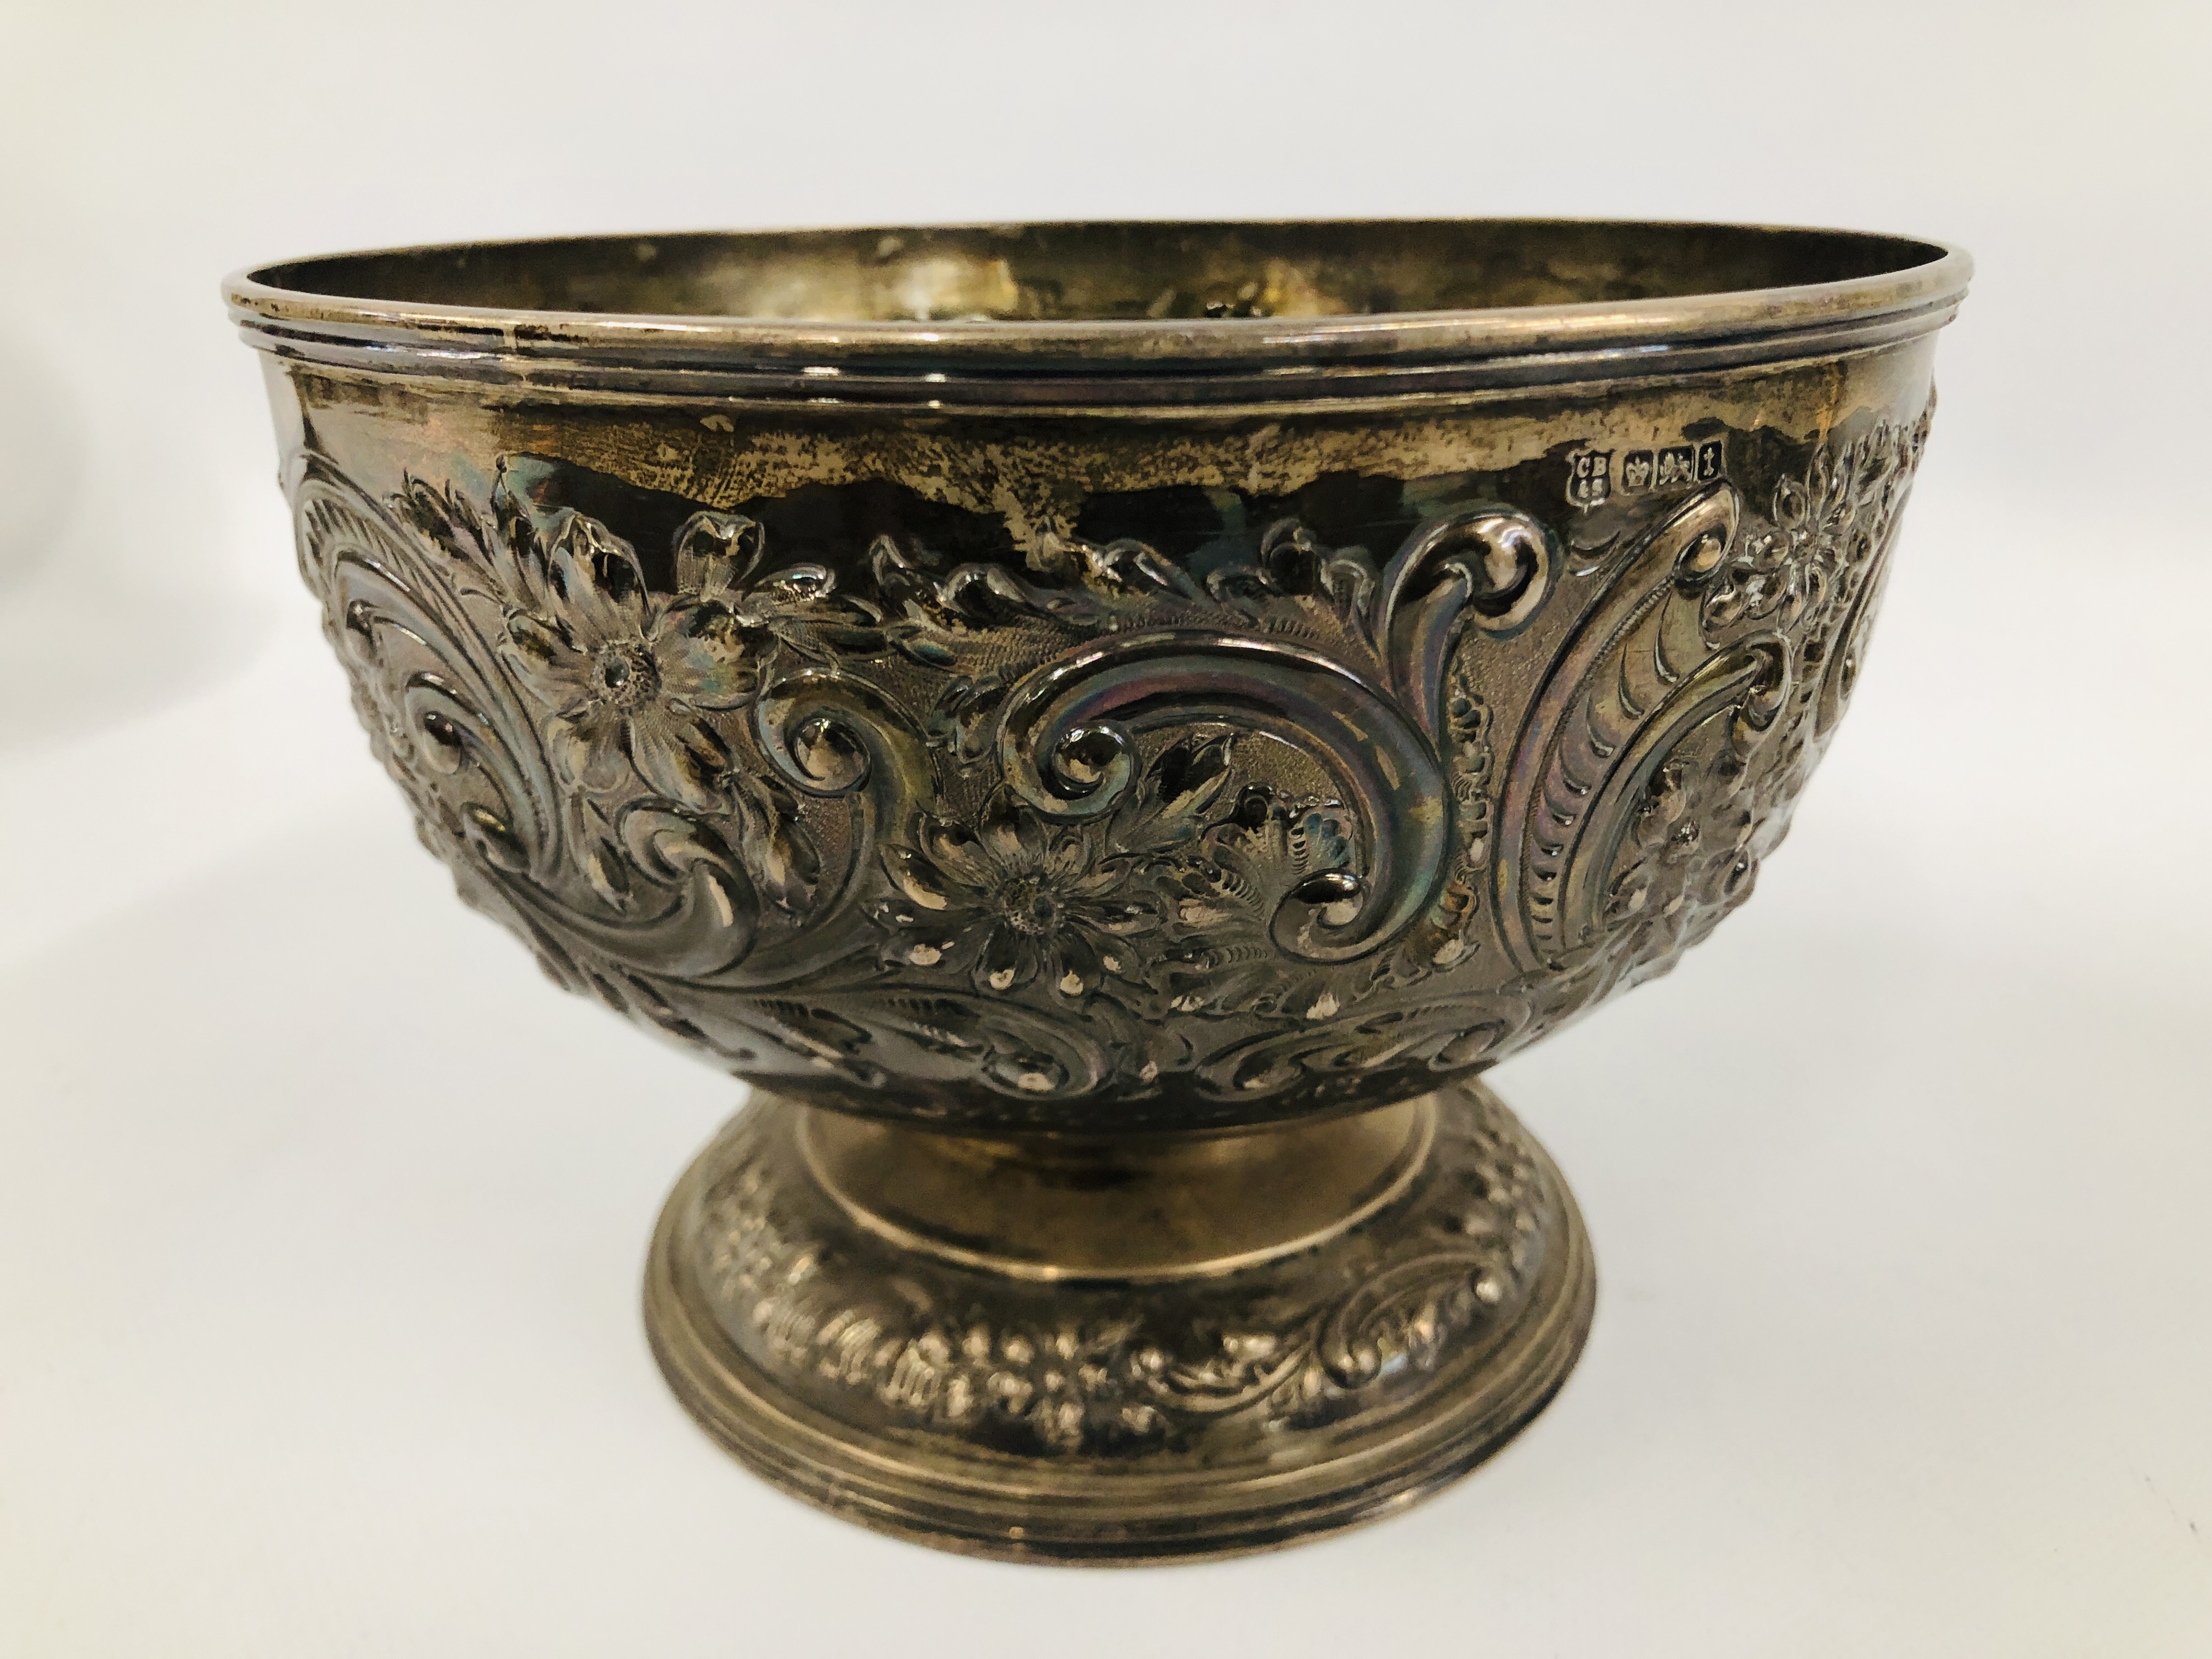 FOOTED CIRCULAR SILVER ROSE BOWL THE BODY WITH SCROLL AND FLOWER DECORATION SHEFFIELD 1912 WIDTH - Image 7 of 9